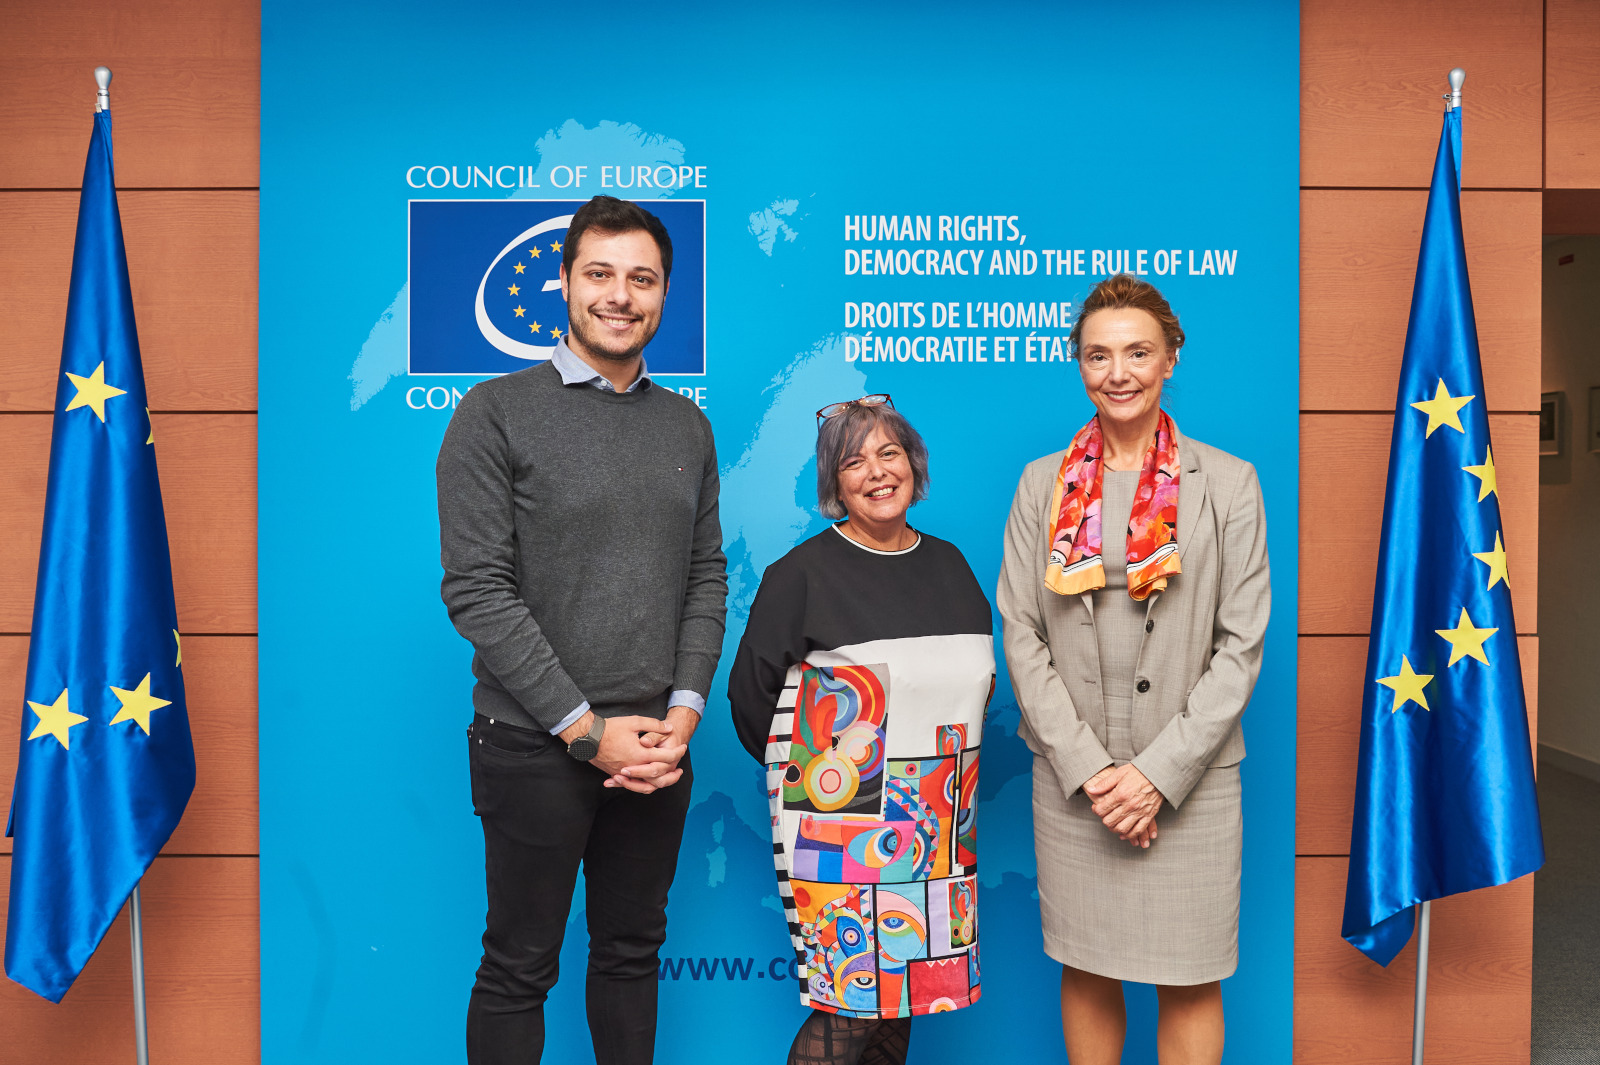 From left to right: Spyros Papadatos, Chair of the Advisory Council on Youth, Miriam Teuma, Chair of the European Steering Committee for Youth, and Marija Pejčinović Burić, Secretary General of the Council of Europe